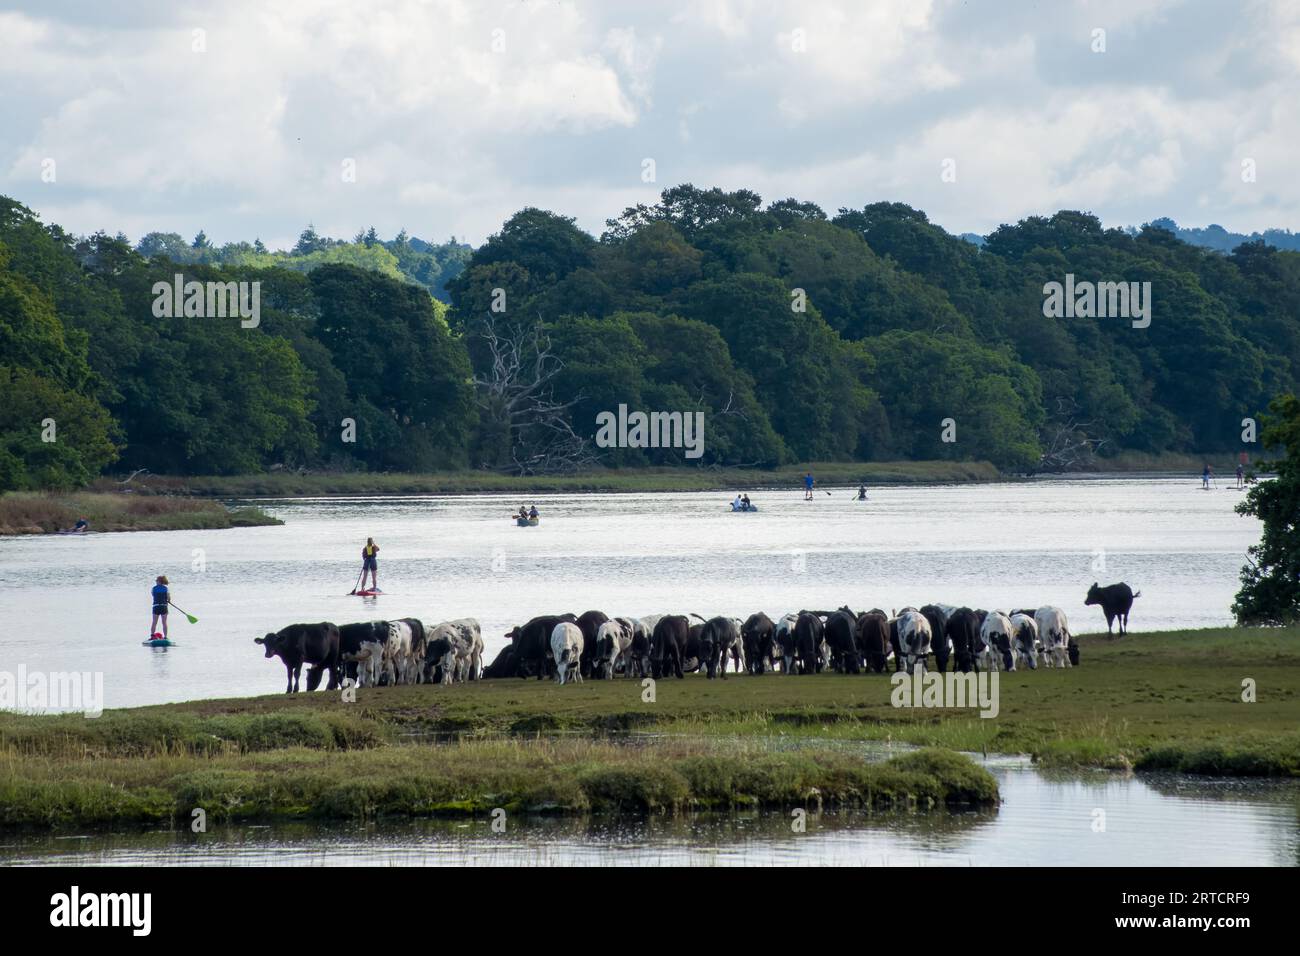 cows lined up on the bank of the River Hamble Hampshire England watching paddleboarders paddle past Stock Photo